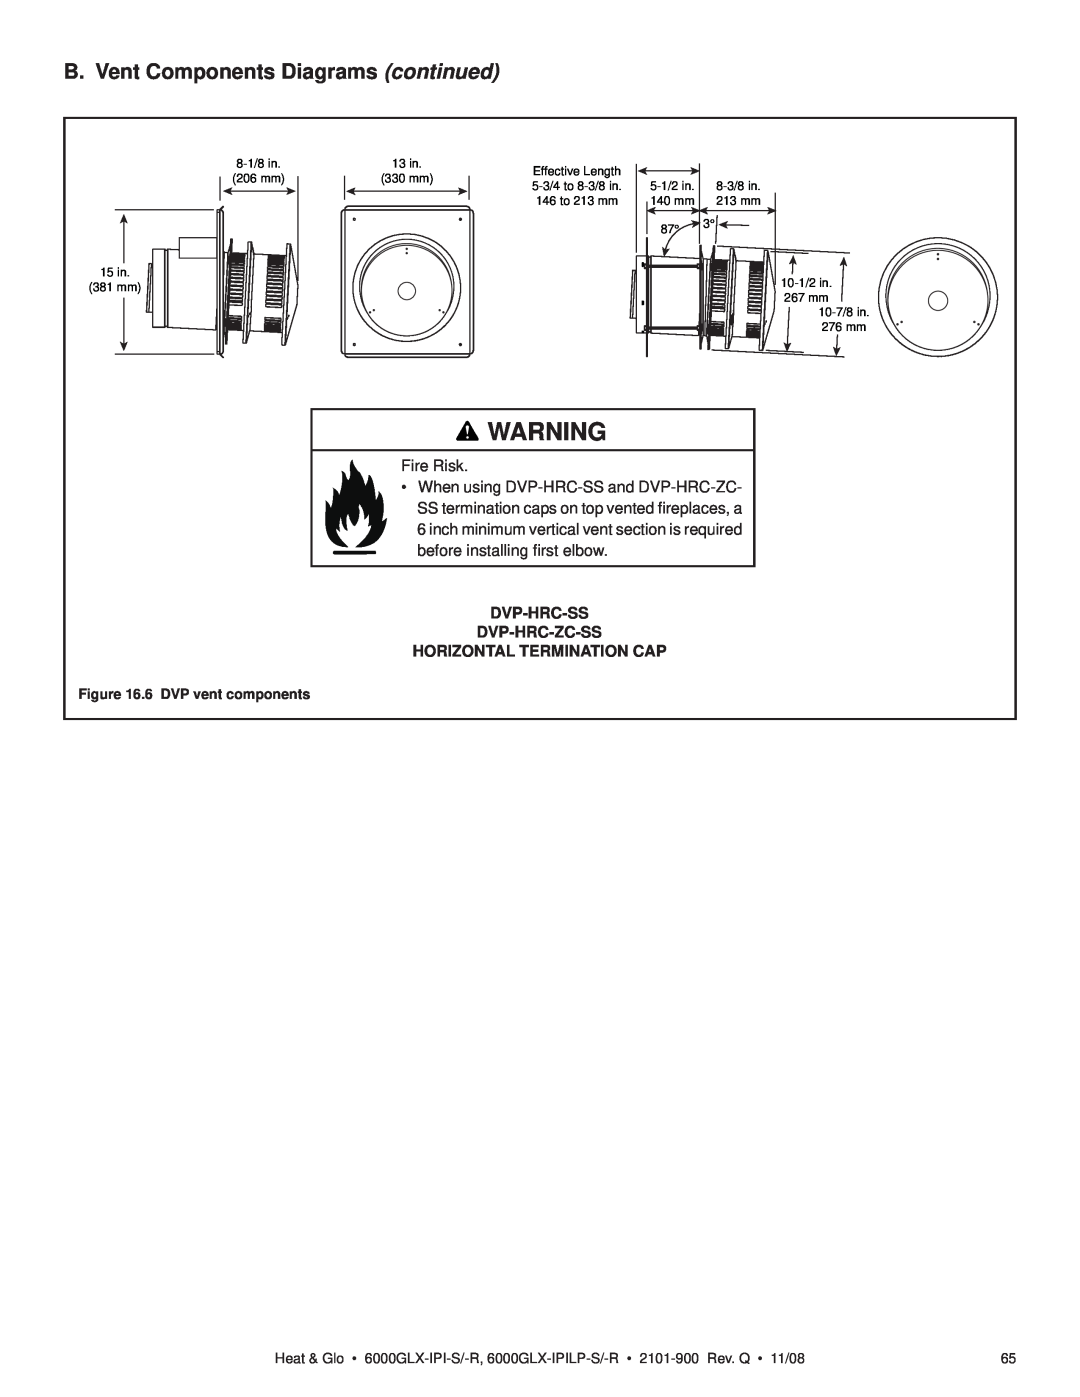 Heat & Glo LifeStyle 6000GLX-IPILP-S/-R B. Vent Components Diagrams continued, Fire Risk, before installing ﬁrst elbow 